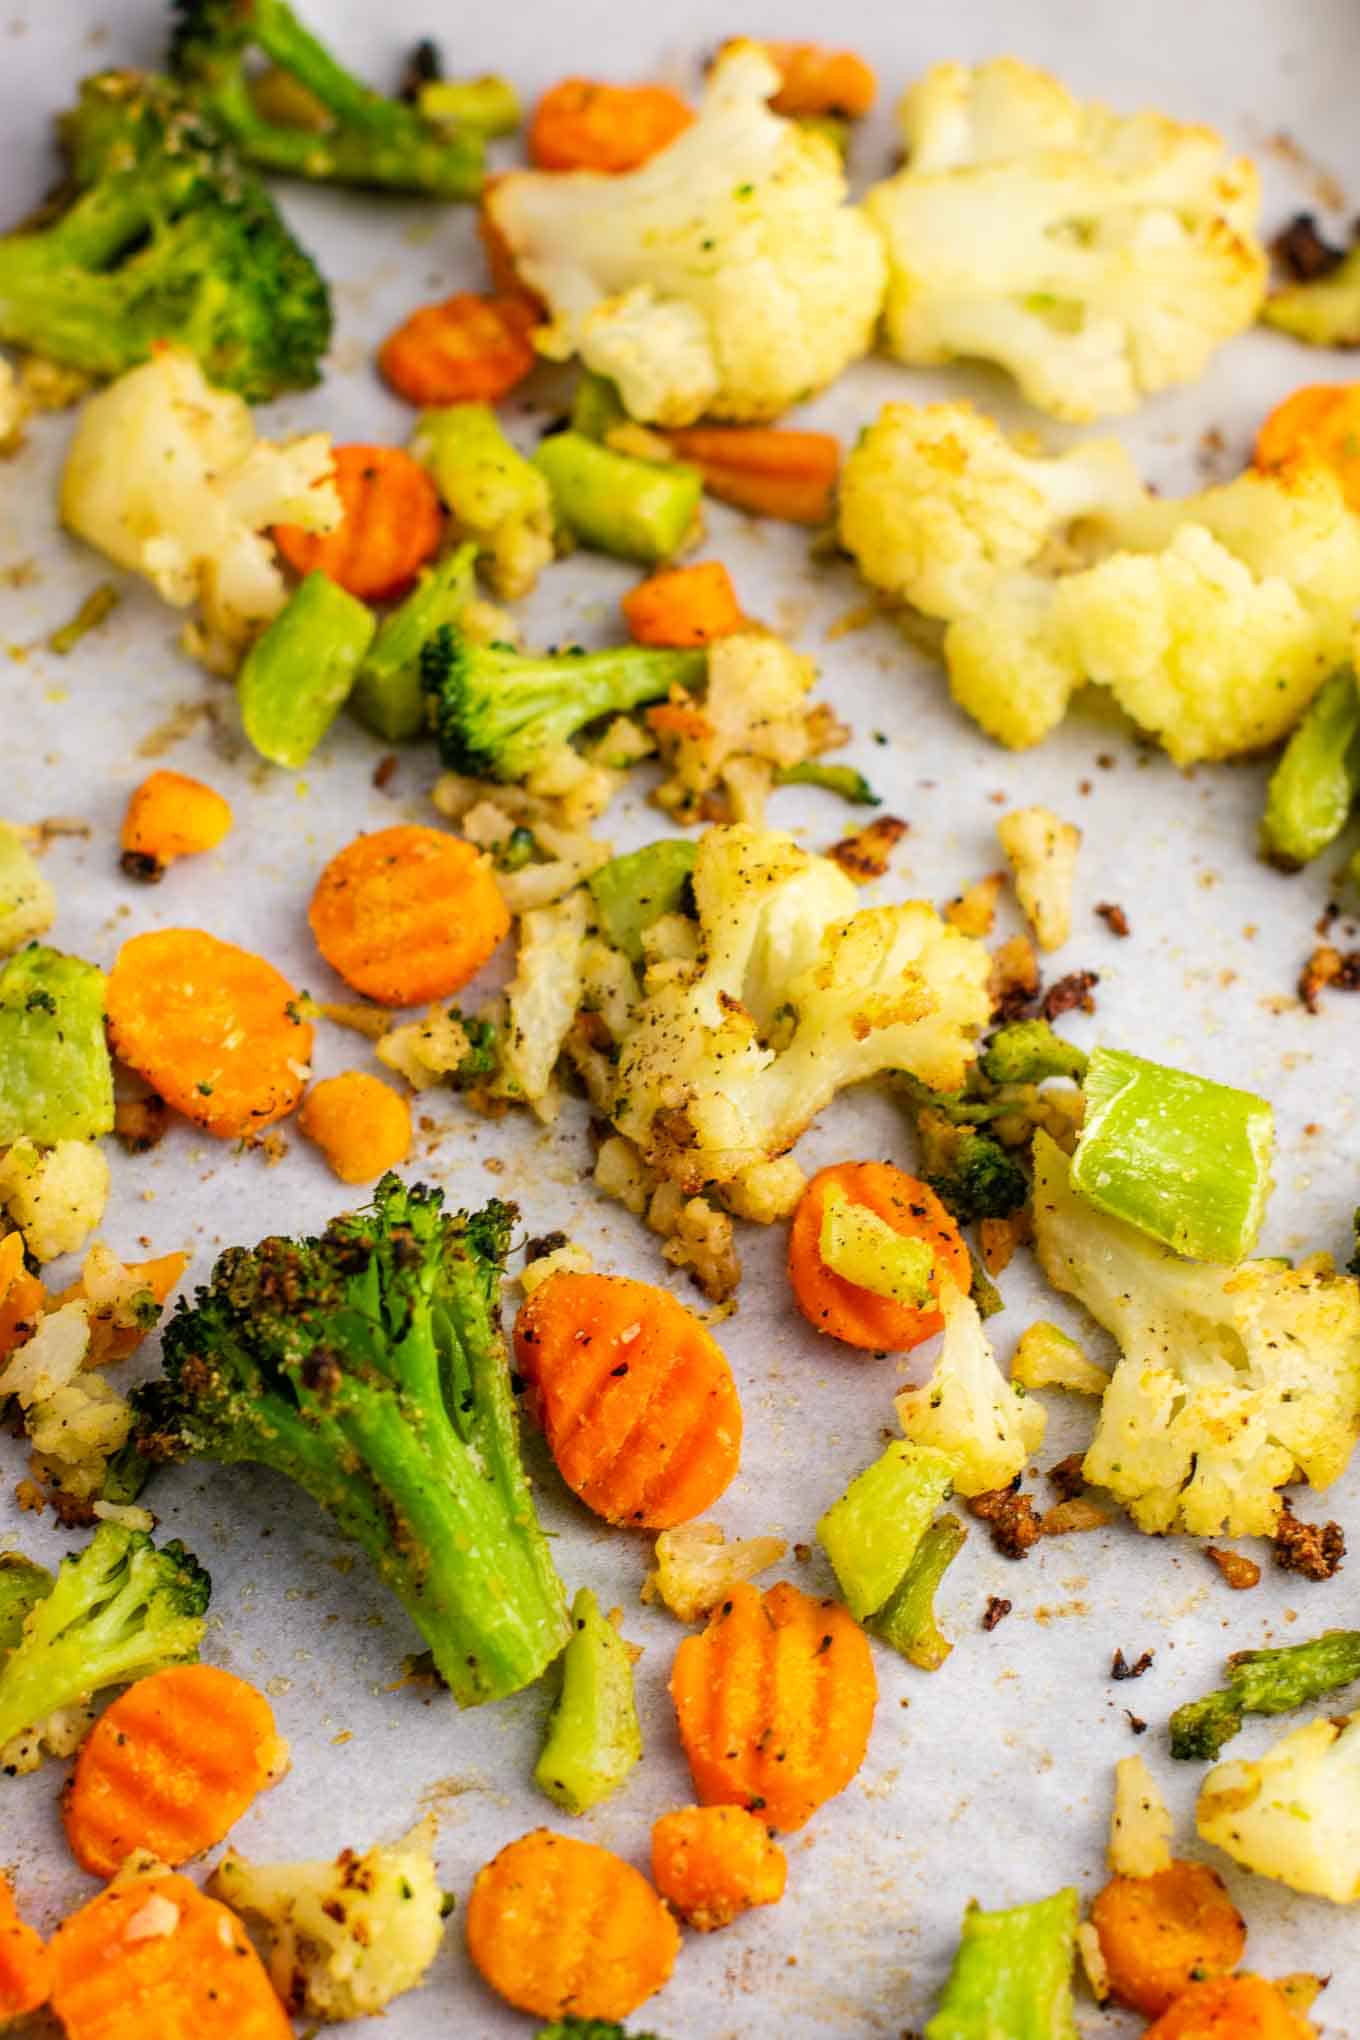 roasted frozen veggies on the baking sheet after cooking